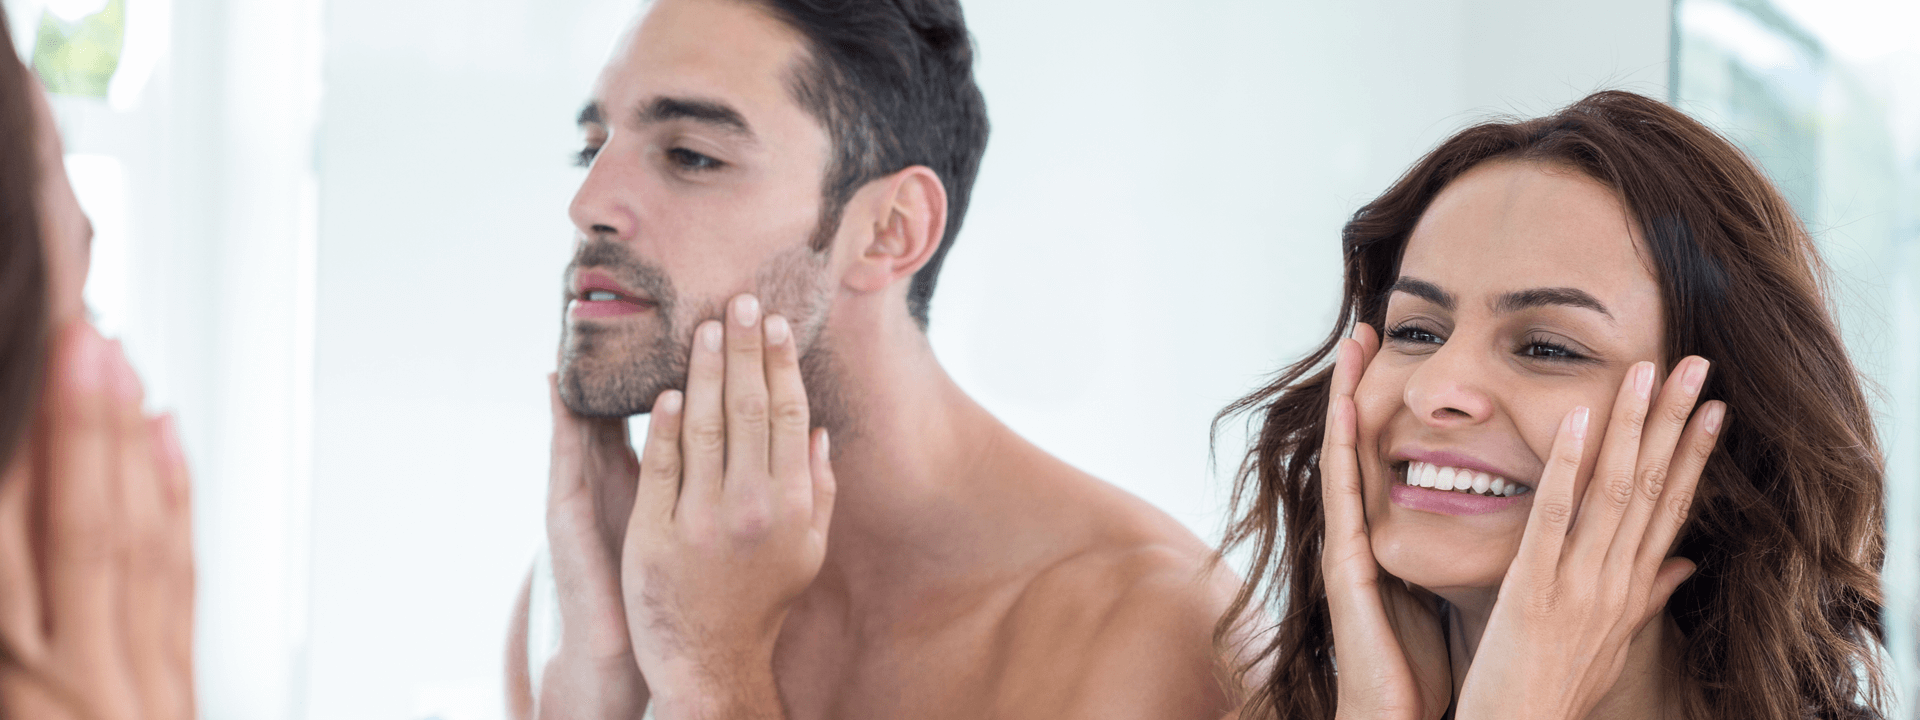 The Skin Differences Between Men and Women